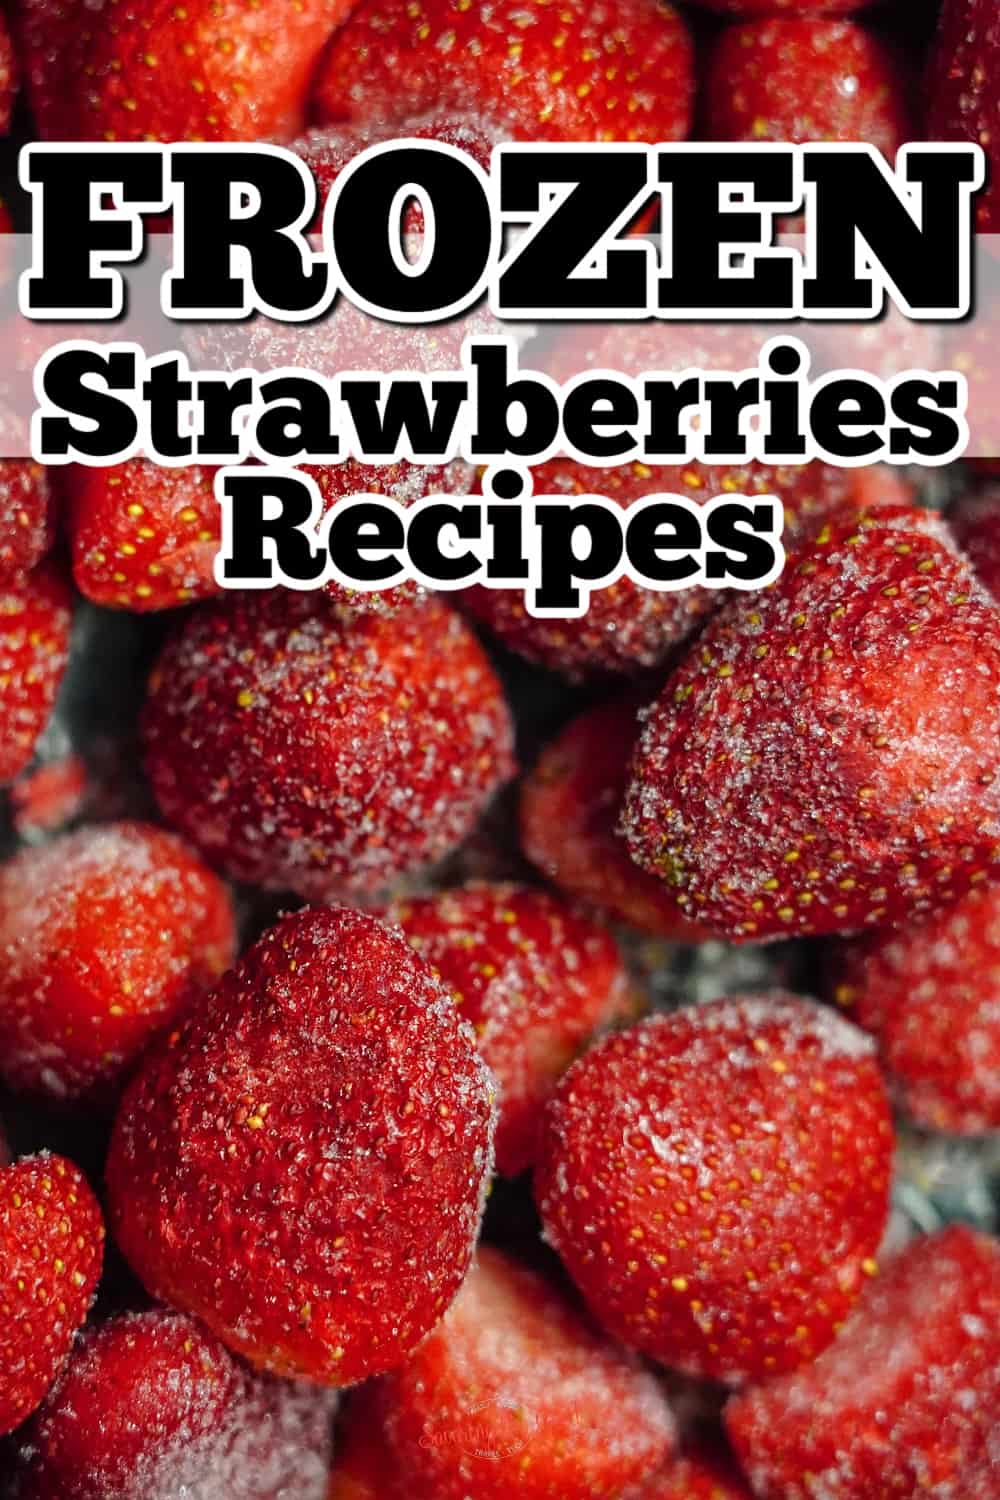 Frozen strawberries with the text frozen strawberries recipes.